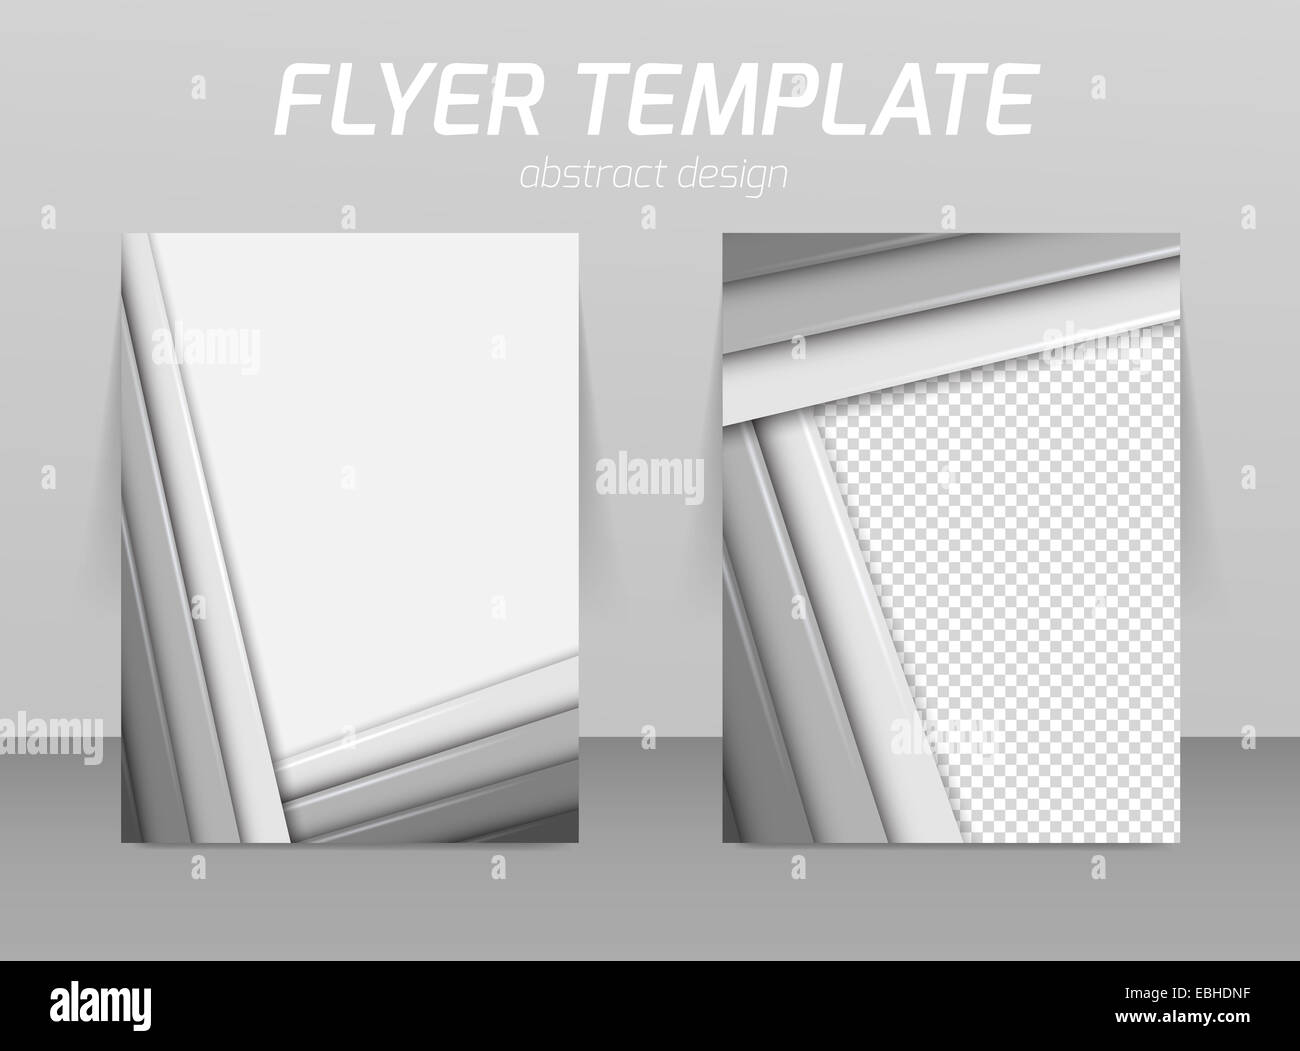 Abstract flyer template design with gray lines Stock Photo